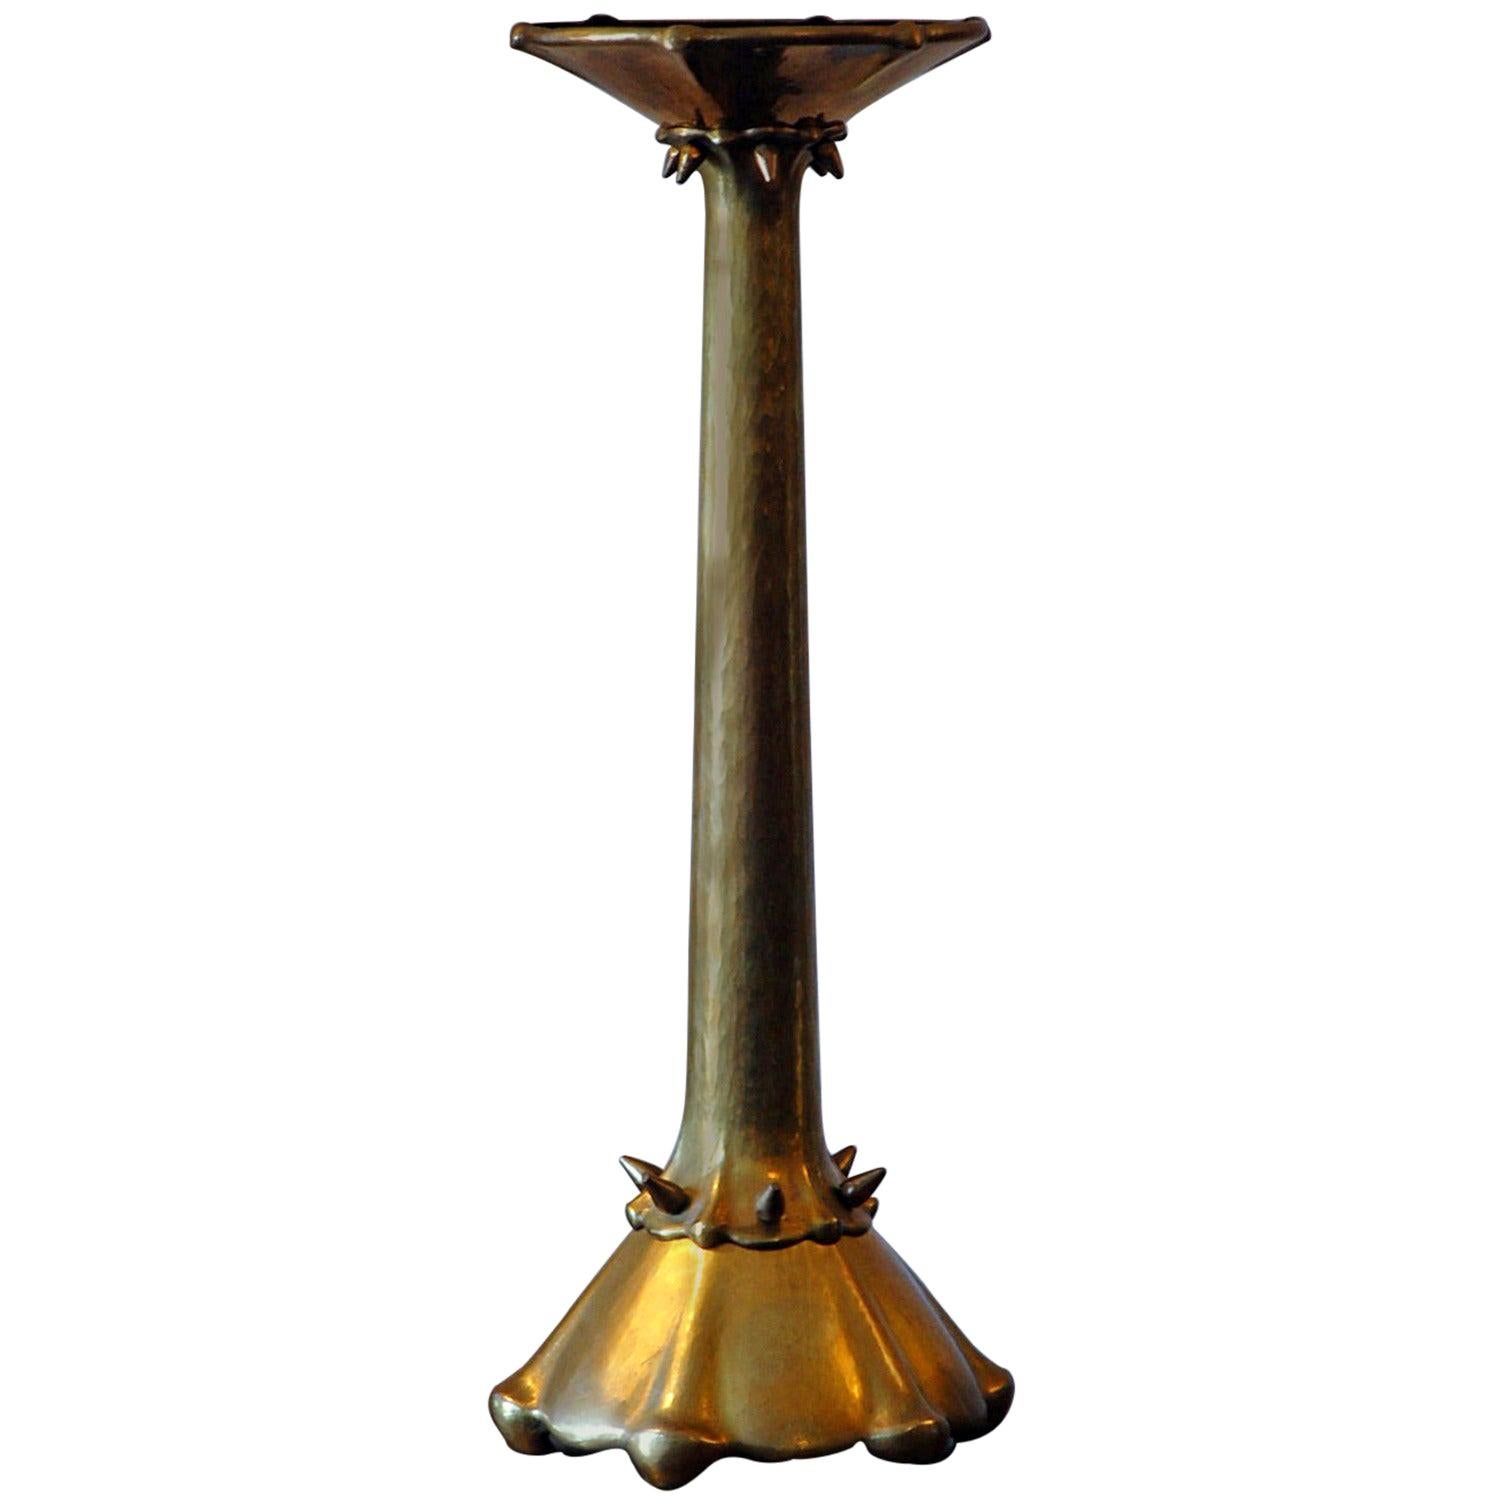 Rare Hammered Brass Candlestick by Atelier Brom For Sale